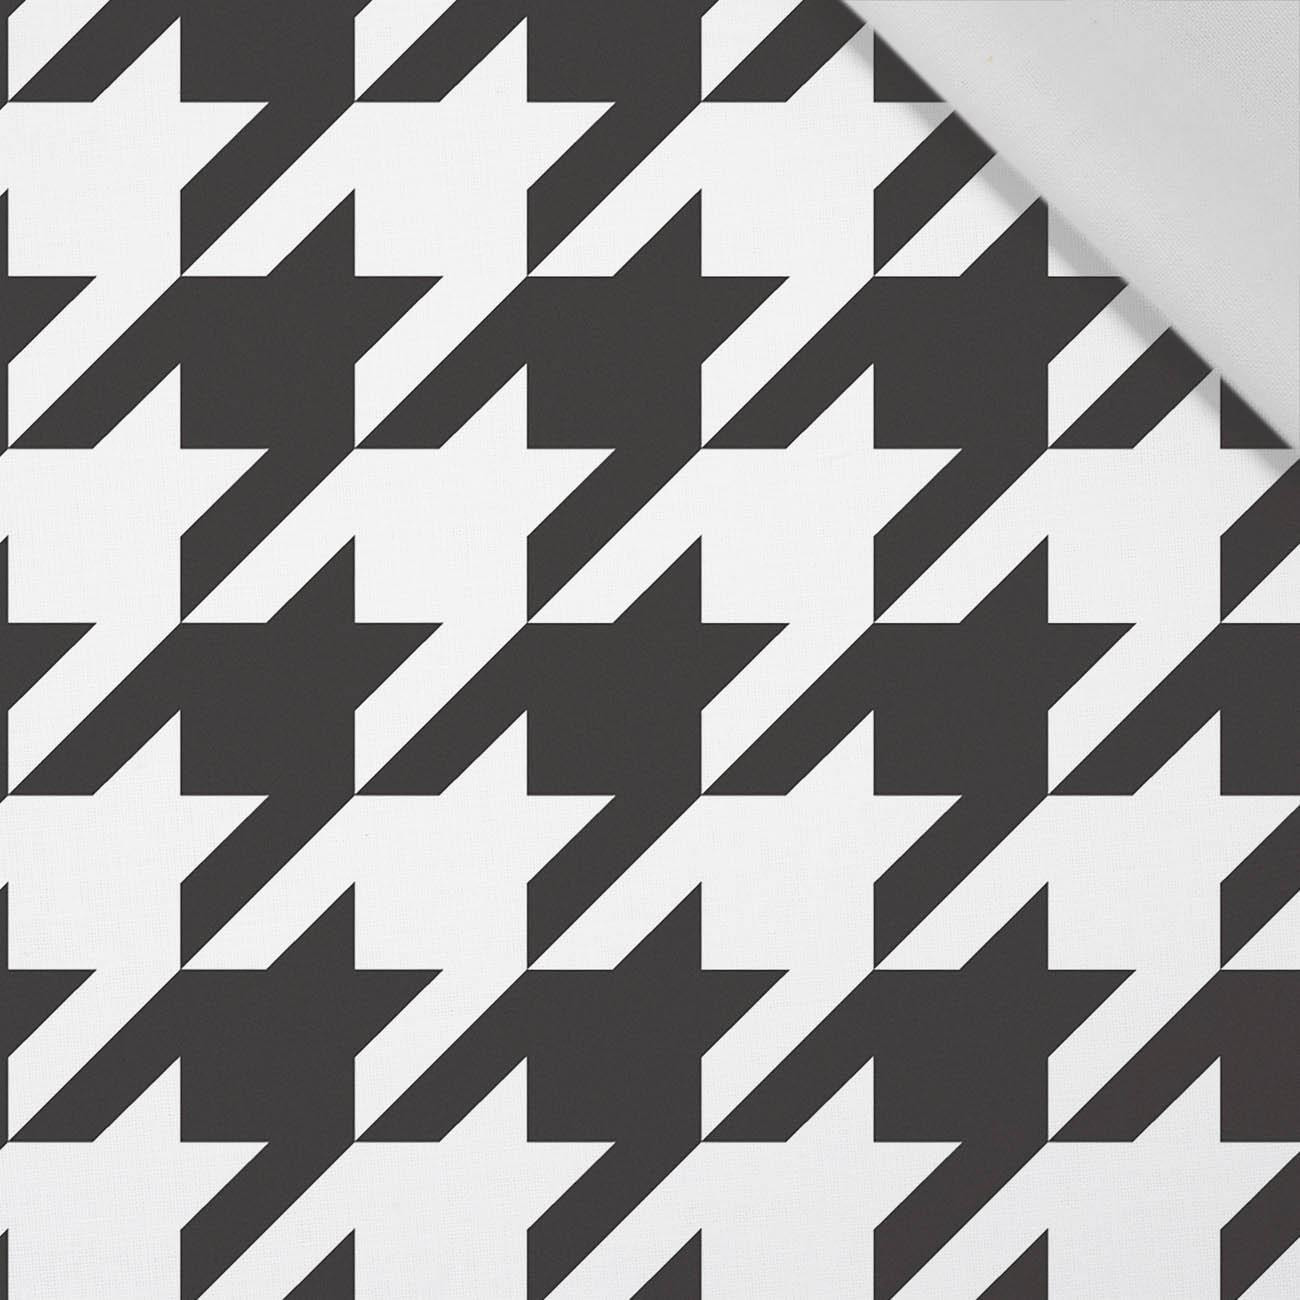 50CM BLACK HOUNDSTOOTH (big) / WHITE - Cotton woven fabric